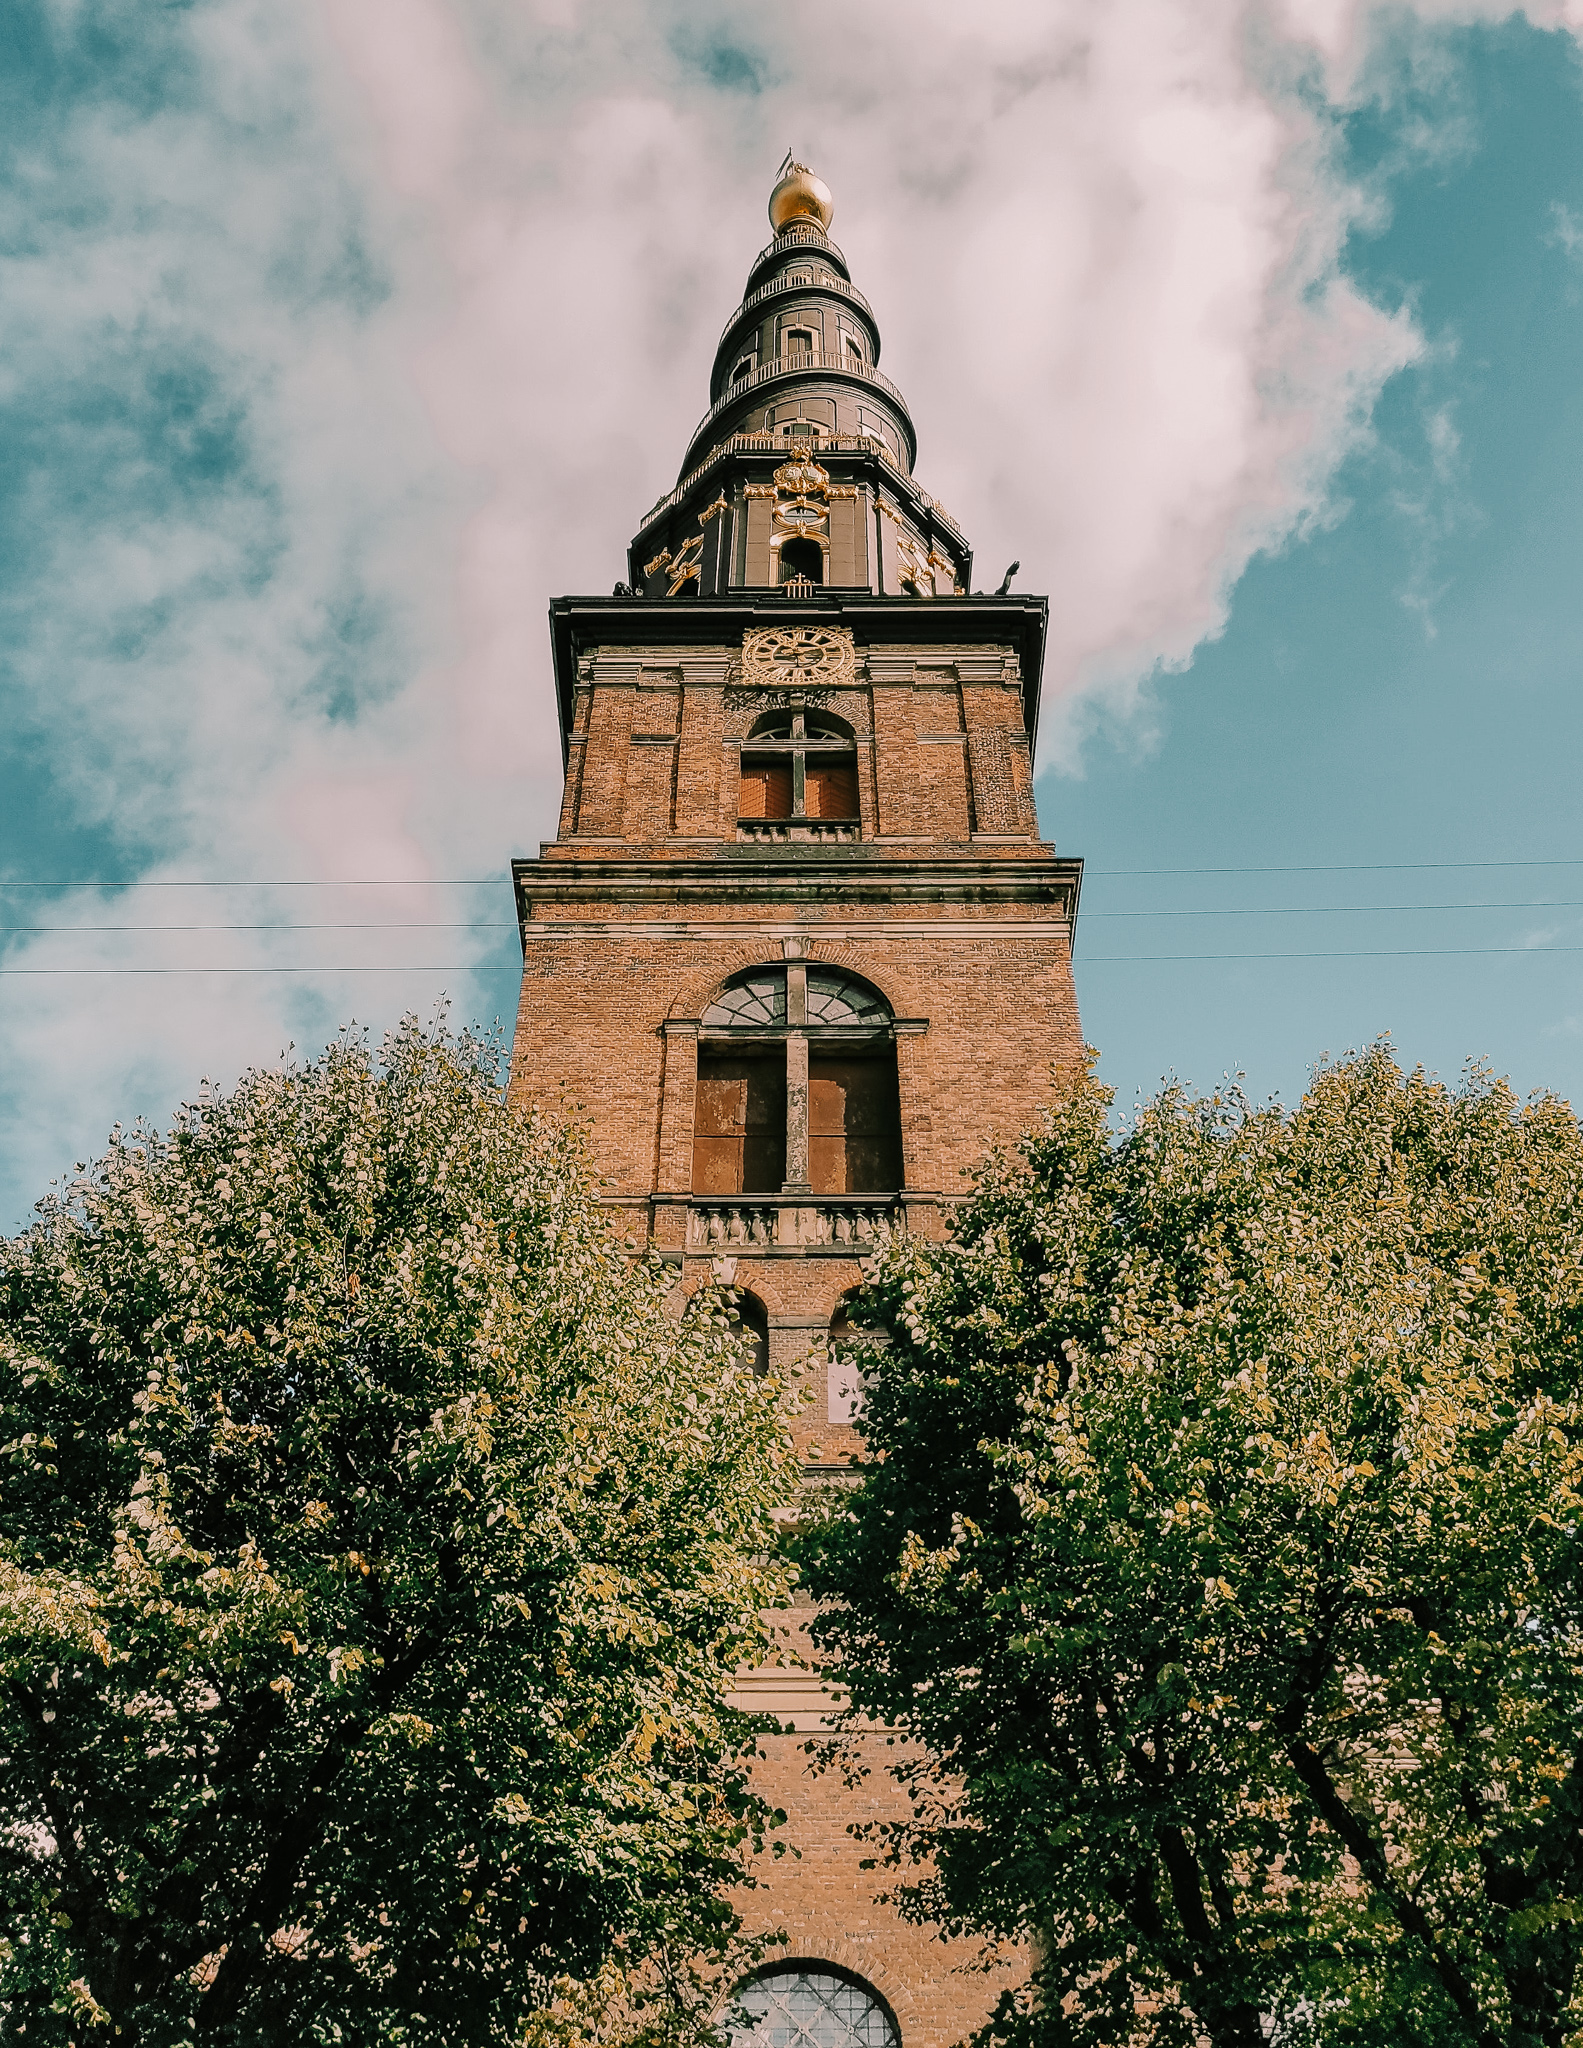 The tower of The Chruch of our Savior in Christianshavn, Copenhagen. It has brick throughout the exterior with a brown spiraled tip with a golden ball at the top of the tower.